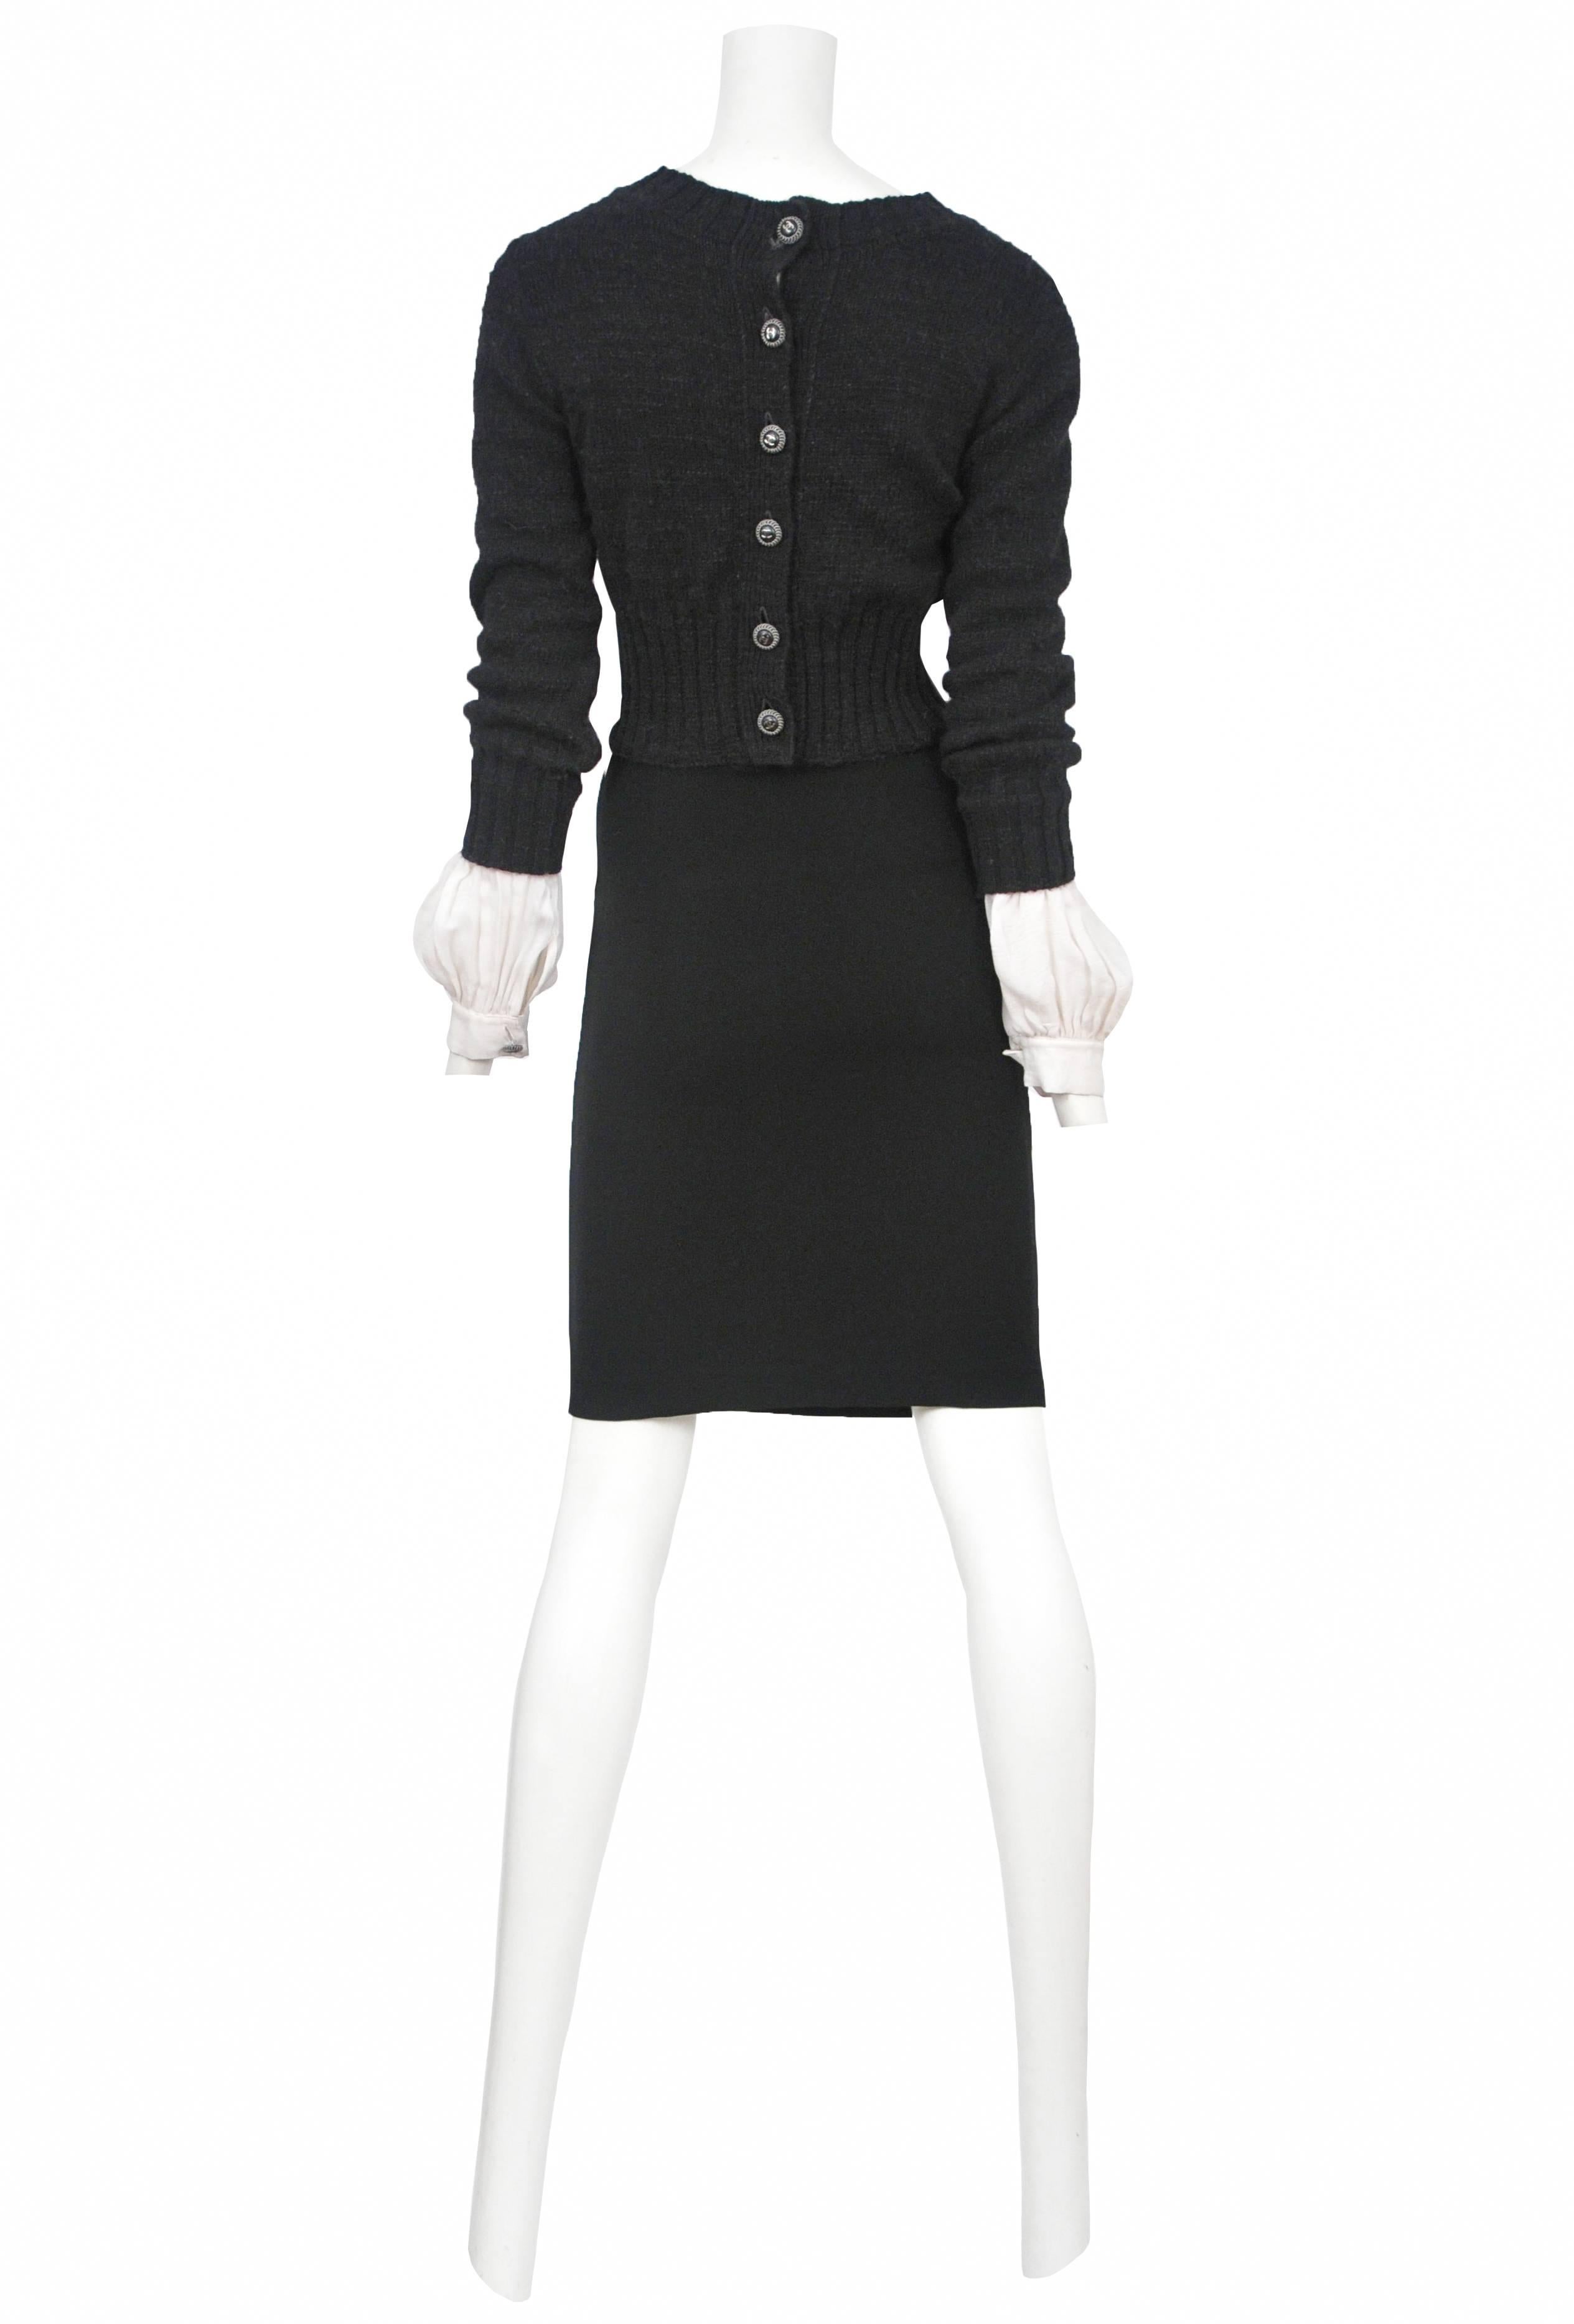 Vintage Chanel black sweater dress featuring a black crew neck sweater attached to a black knee length skirt, attached white shirt cuffs at the bottom of the sleeves, and a button back entrance.